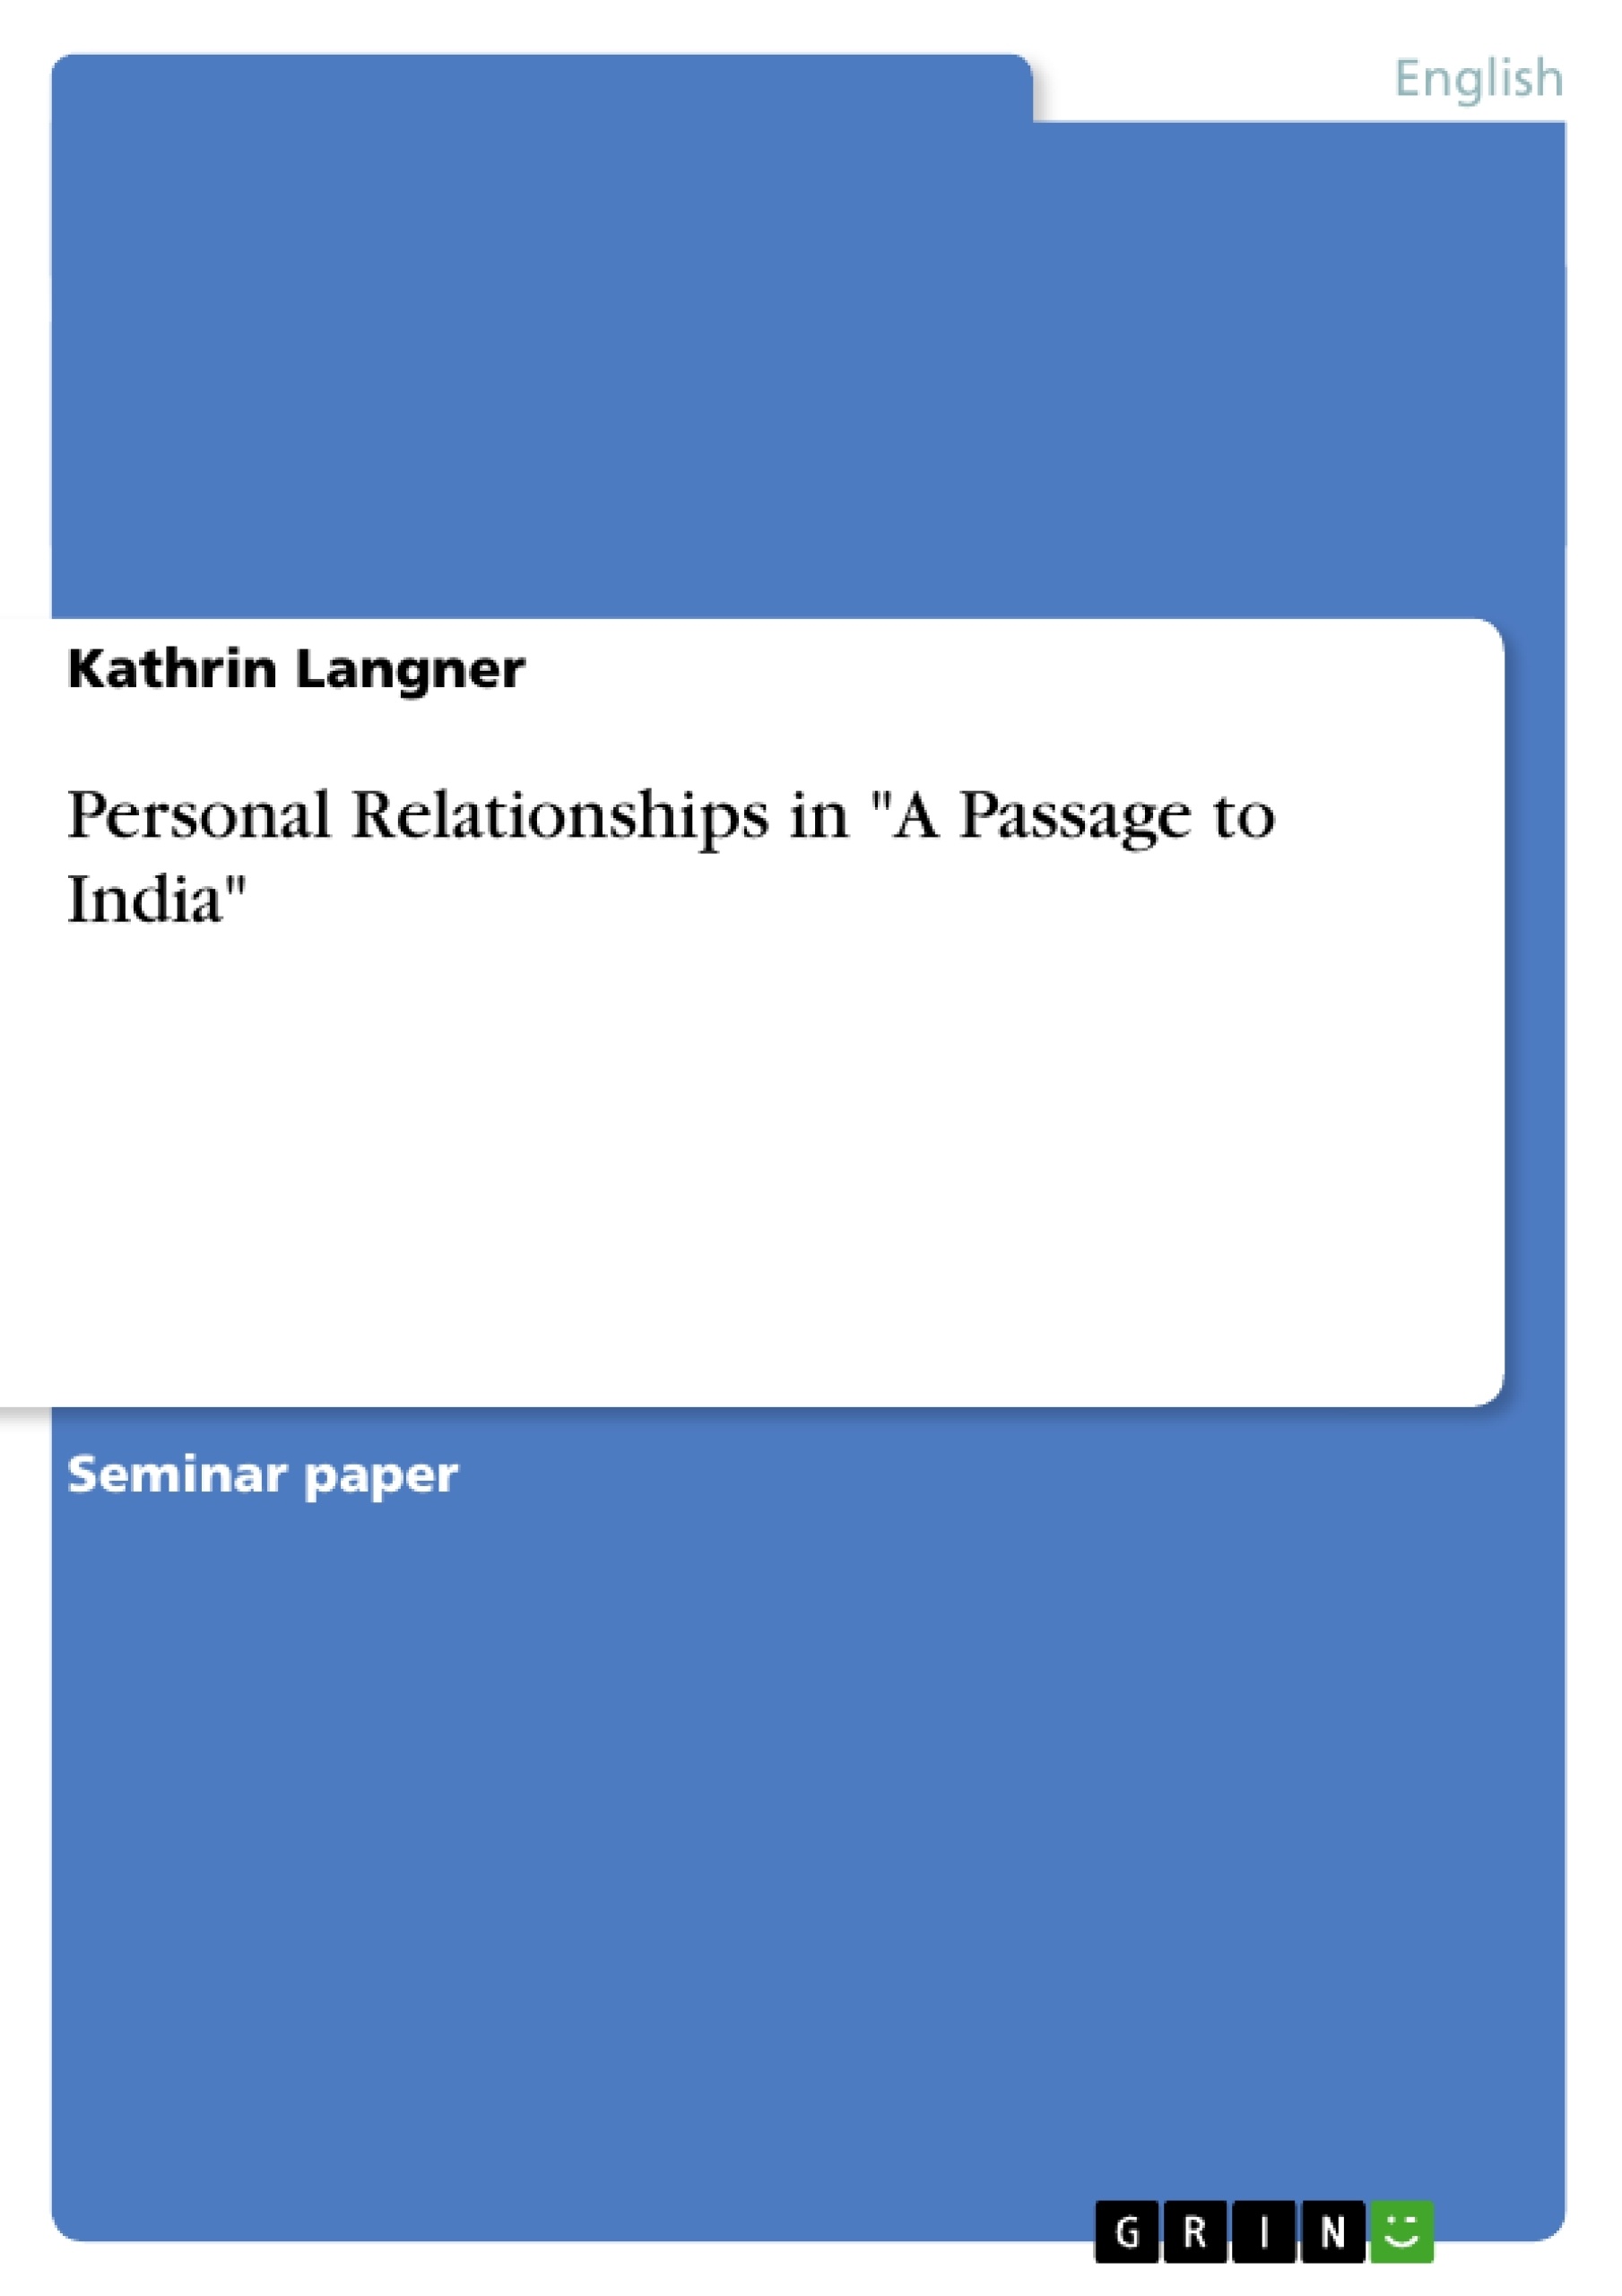 Título: Personal Relationships in "A Passage to India"